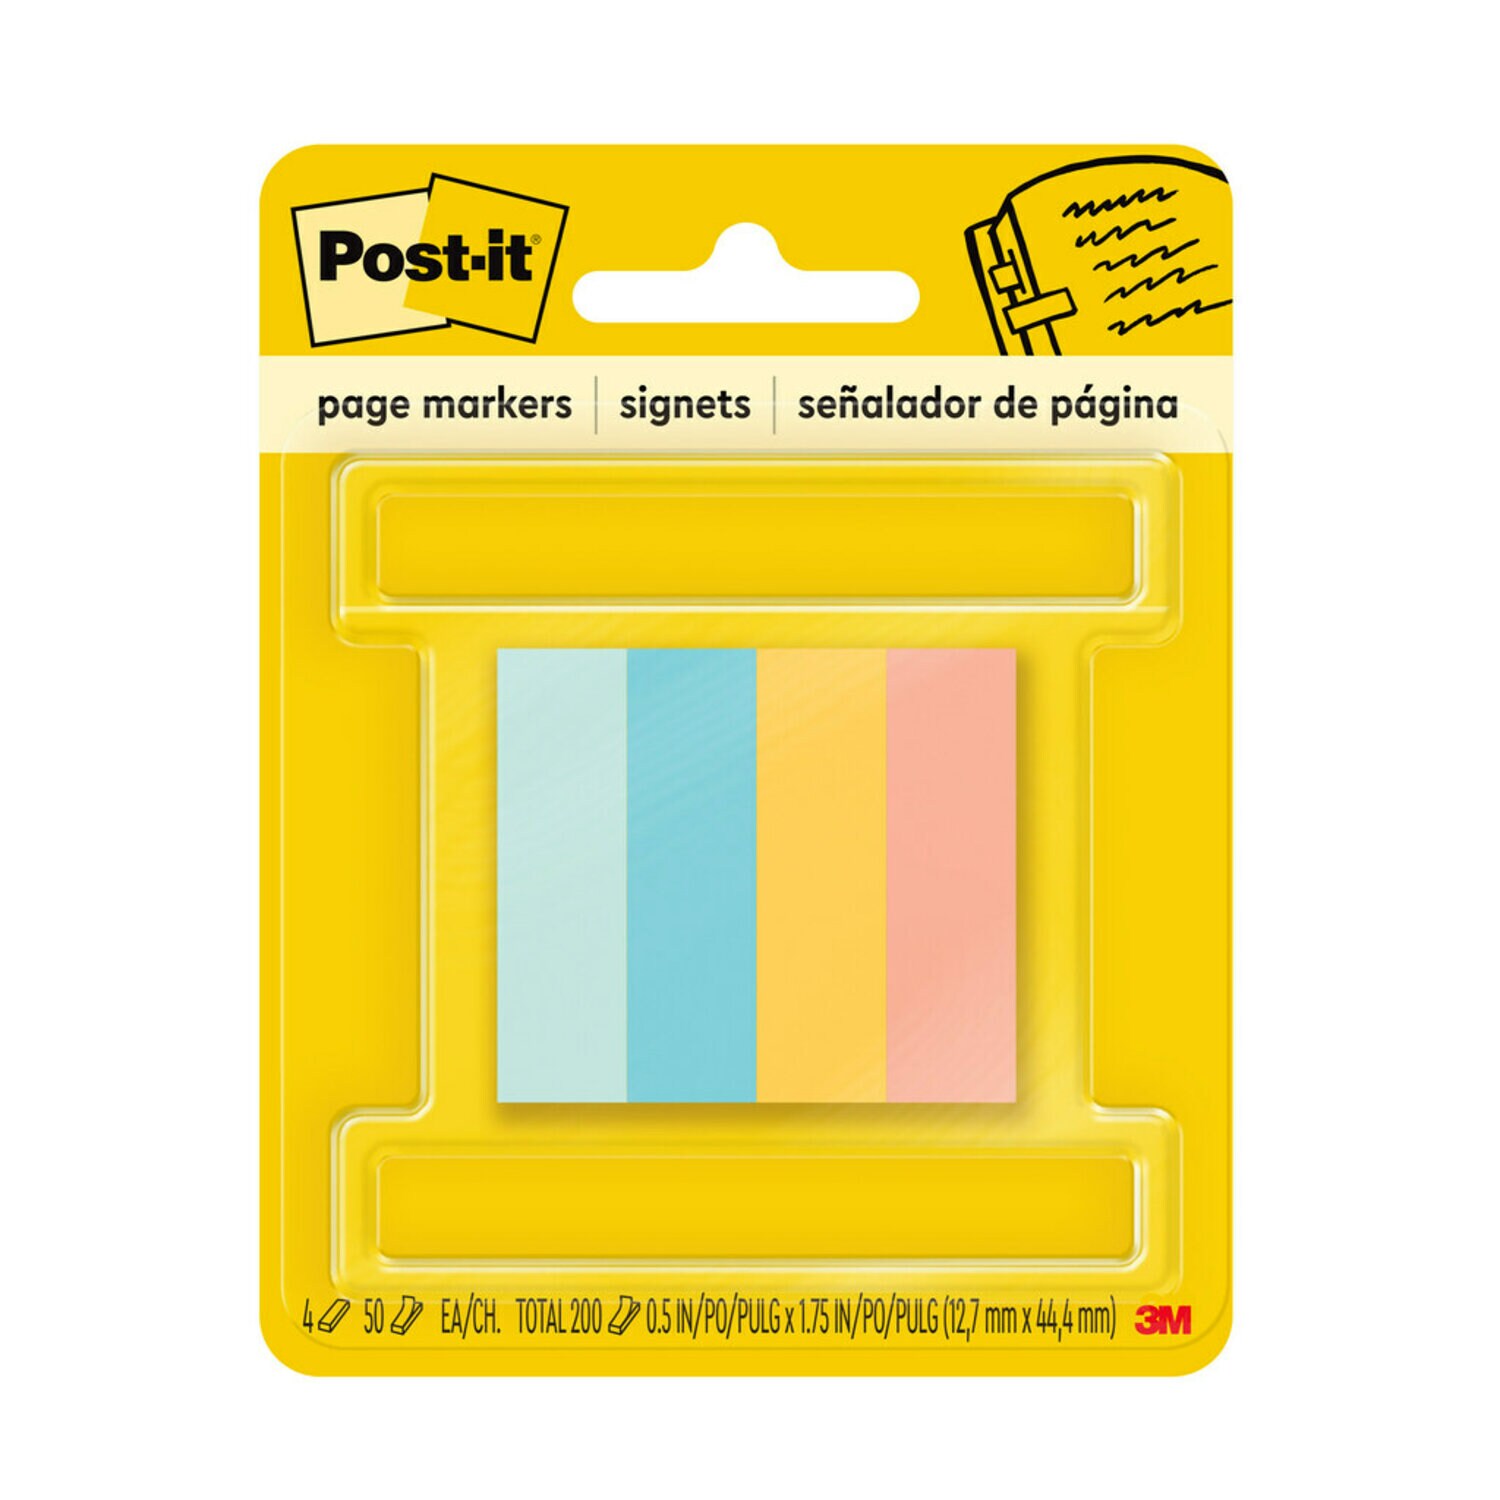 7010044878 - Post-it Page Marker 670-4-D, .5 in x 1.75 in (12,7 mm x 44,4 mm)